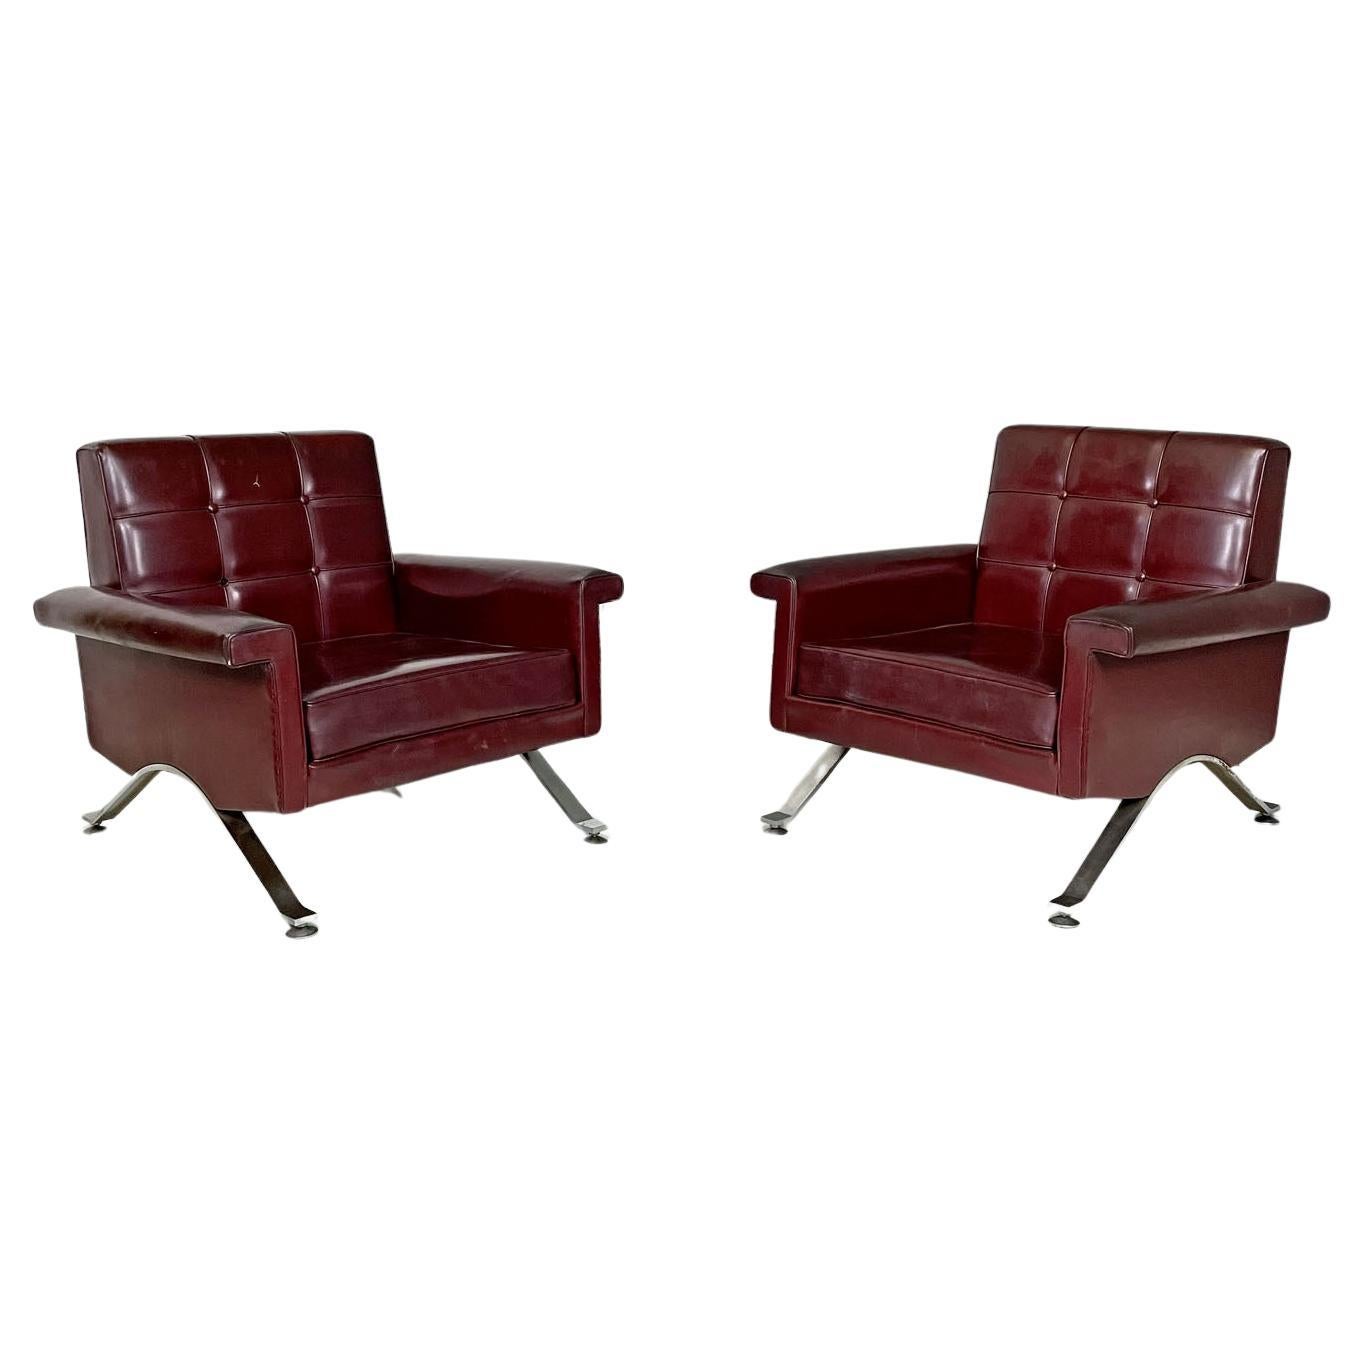 Italian mid-century modern leather armchairs by Ico Parisi for Cassina, 1960s For Sale